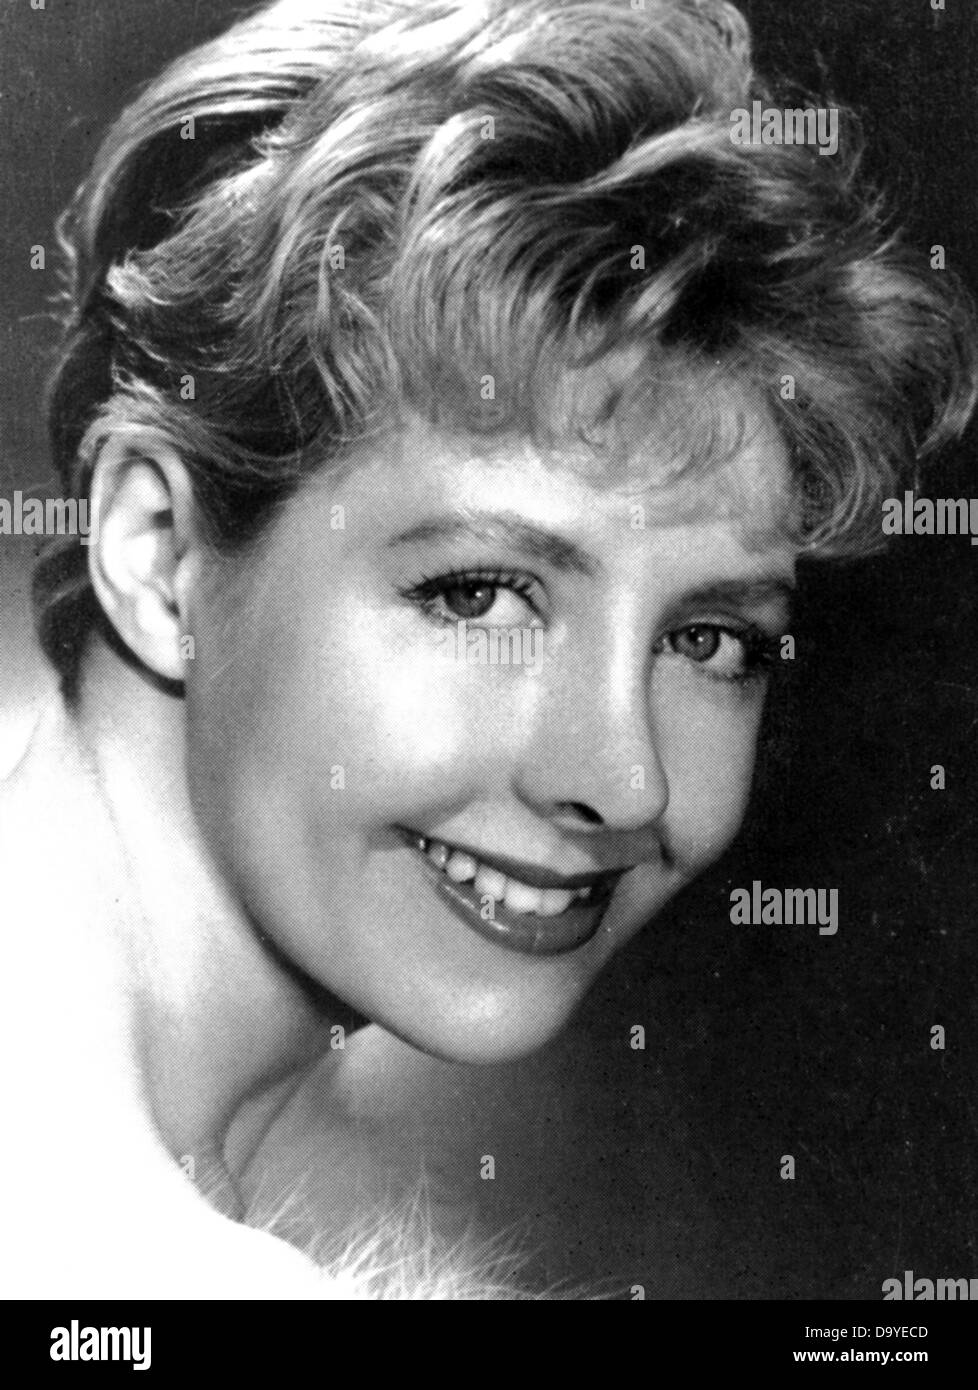 ROSEMARY SQUIRES  UK popular singer about 1963 Stock Photo